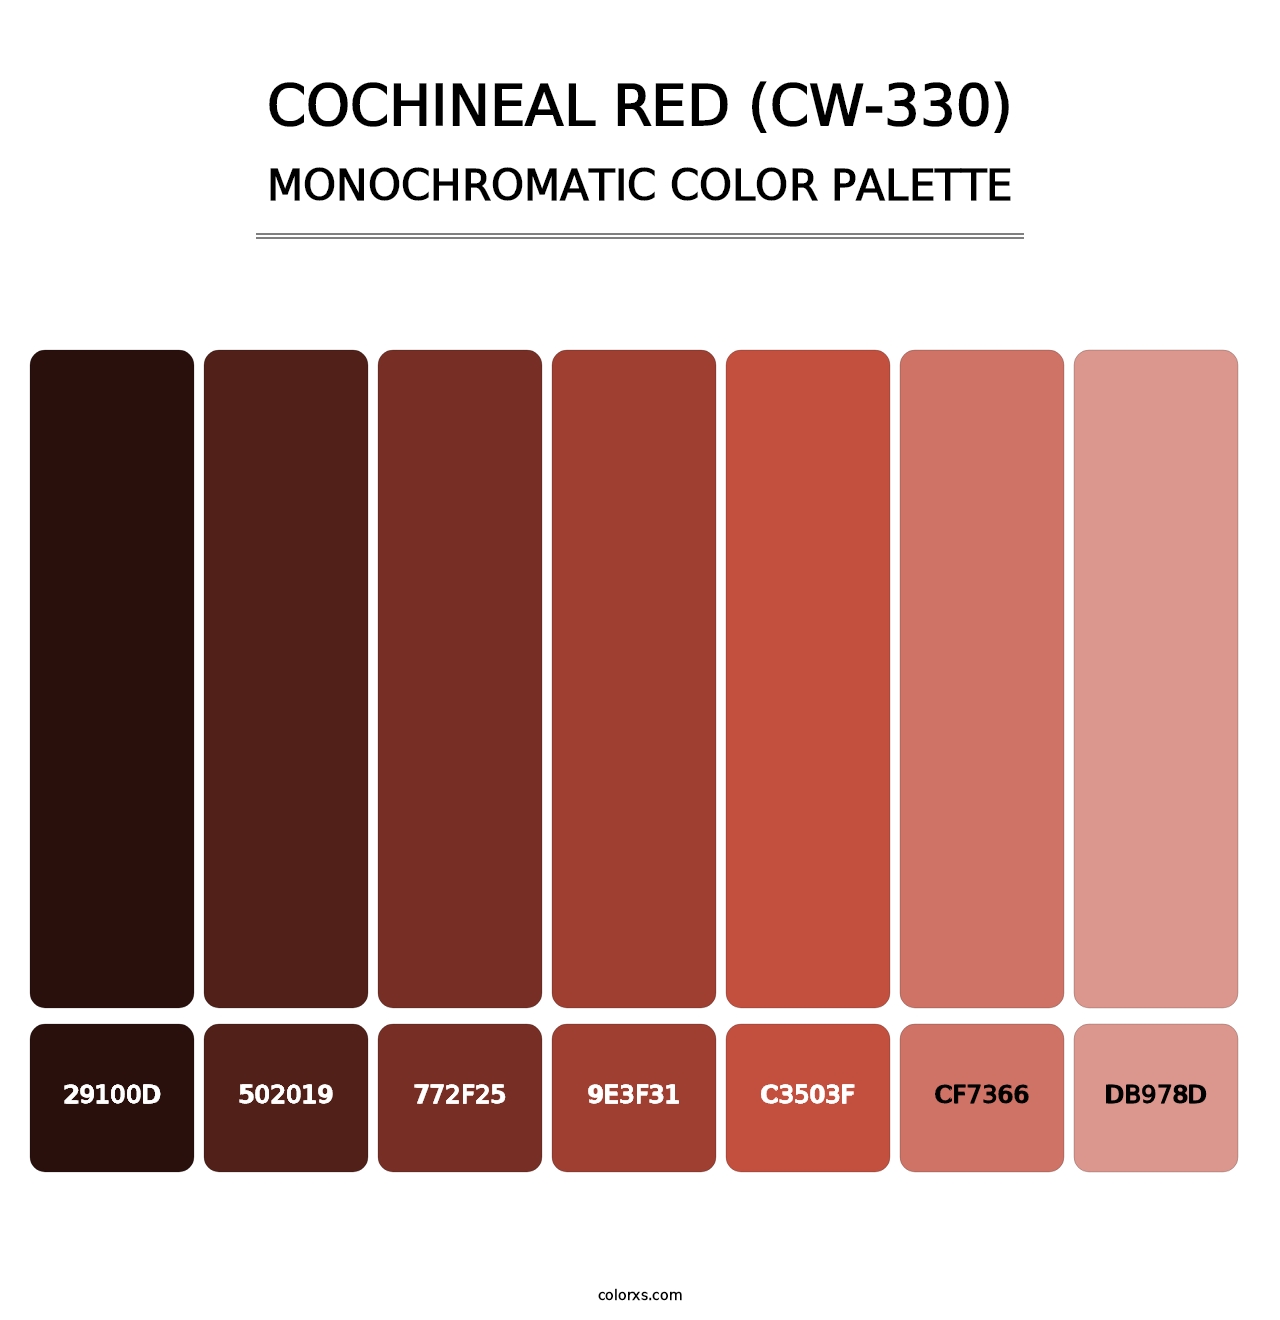 Cochineal Red (CW-330) - Monochromatic Color Palette